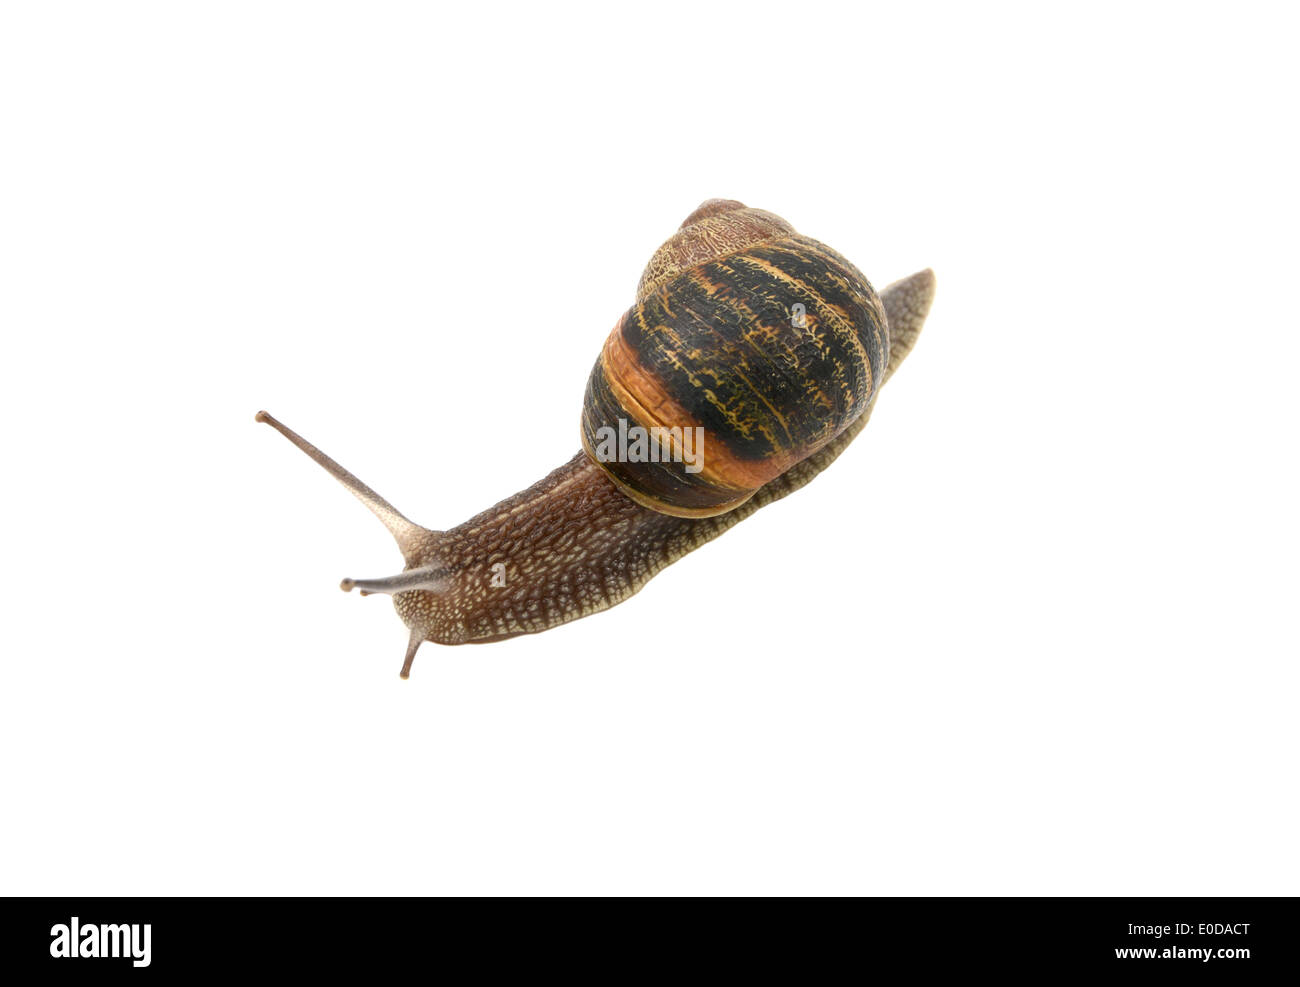 Closeup of a garden snail with tentacles extended, isolated on a white background Stock Photo